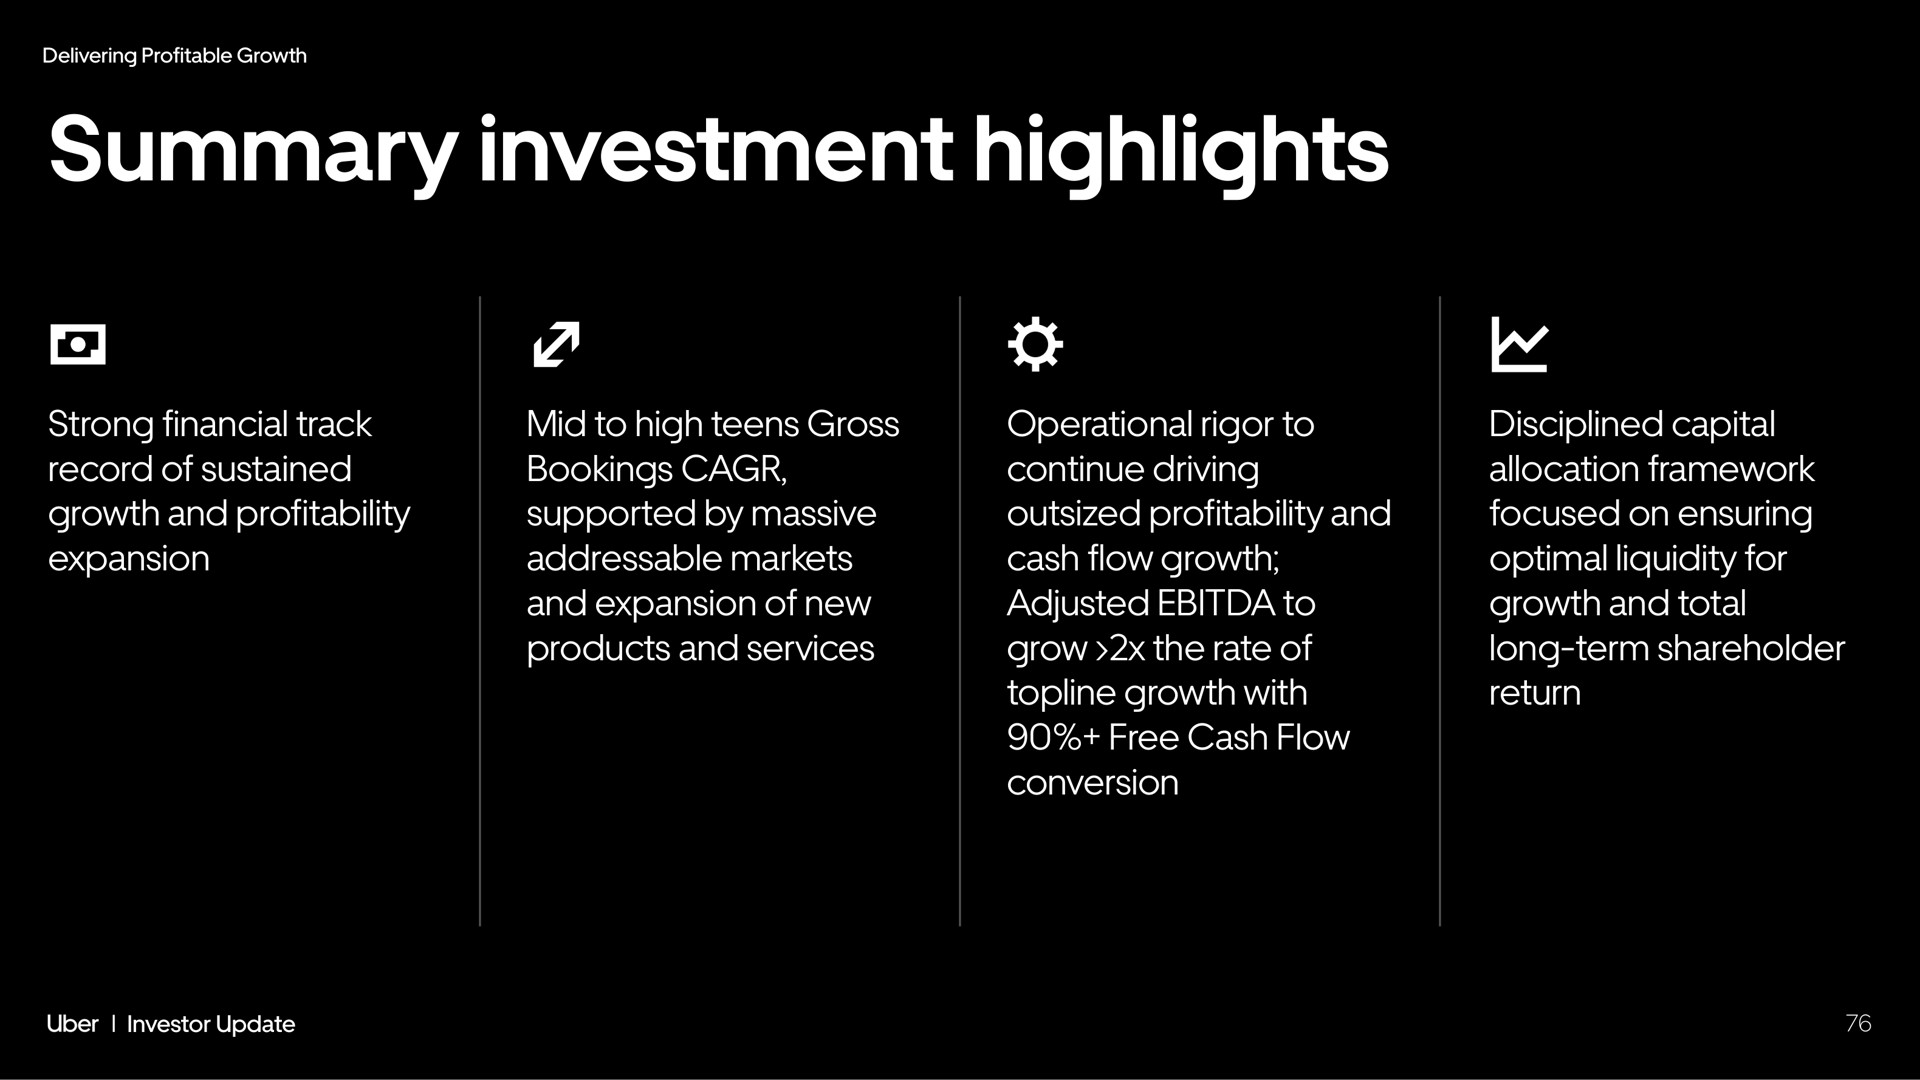 summary investment highlights strong financial track record of sustained growth and profitability expansion mid to high teens gross bookings supported by massive markets and expansion of new products and services operational rigor to continue driving outsized profitability and cash flow growth adjusted to grow the rate of topline growth with free cash flow conversion disciplined capital allocation framework focused on ensuring optimal liquidity for growth and total long term shareholder return | Uber